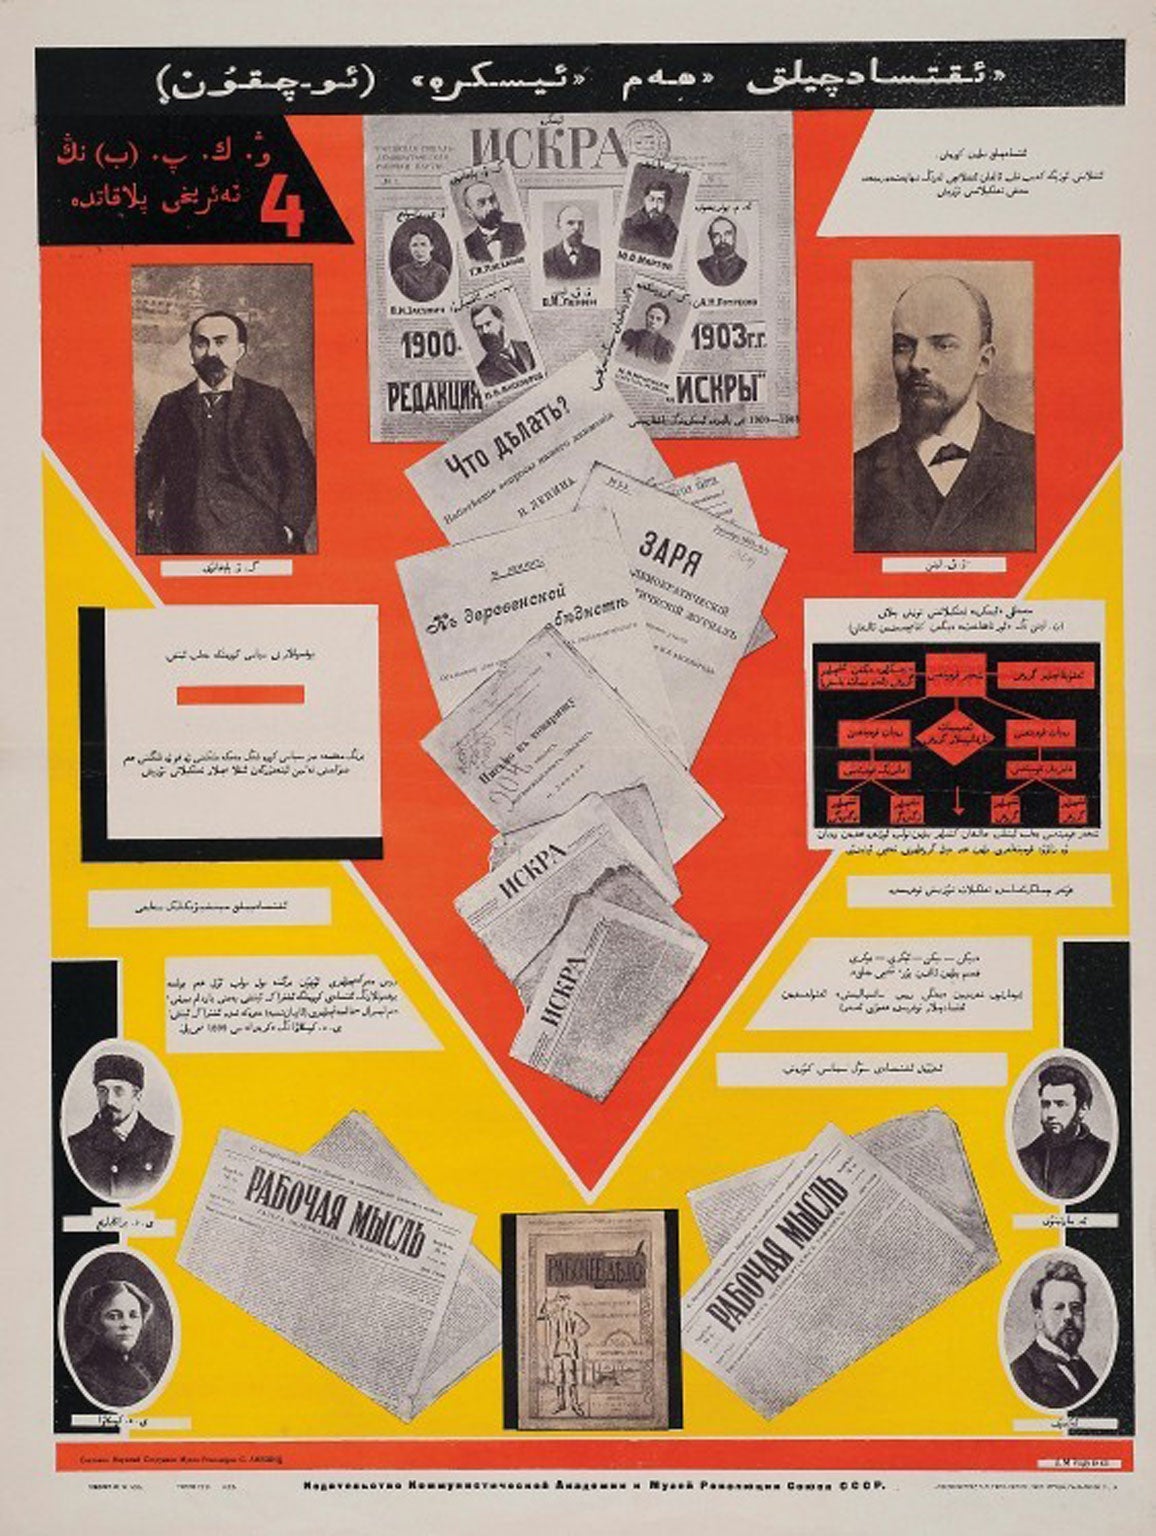 Red alert: ‘History of the VKP(b) poster’ by Aleksandr Rodchenko who adopted the collectivist creed of the Communist Party